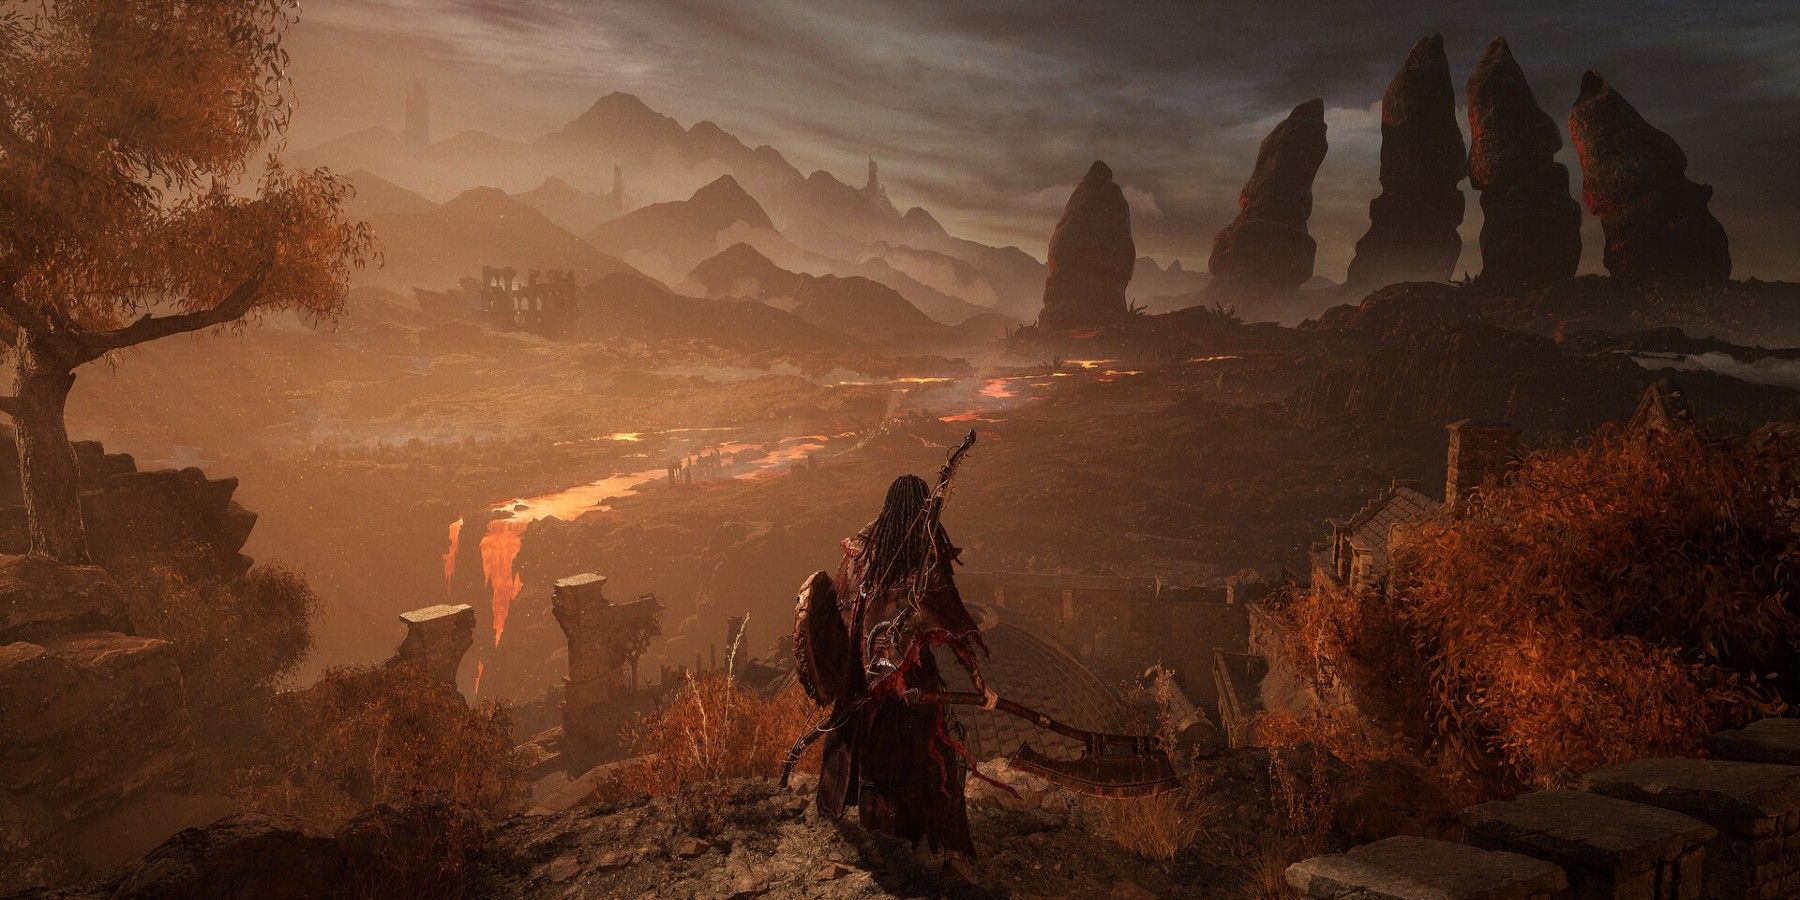 How Lords of the Fallen Makes Good on Being a Spiritual Successor to the Original Dark Souls